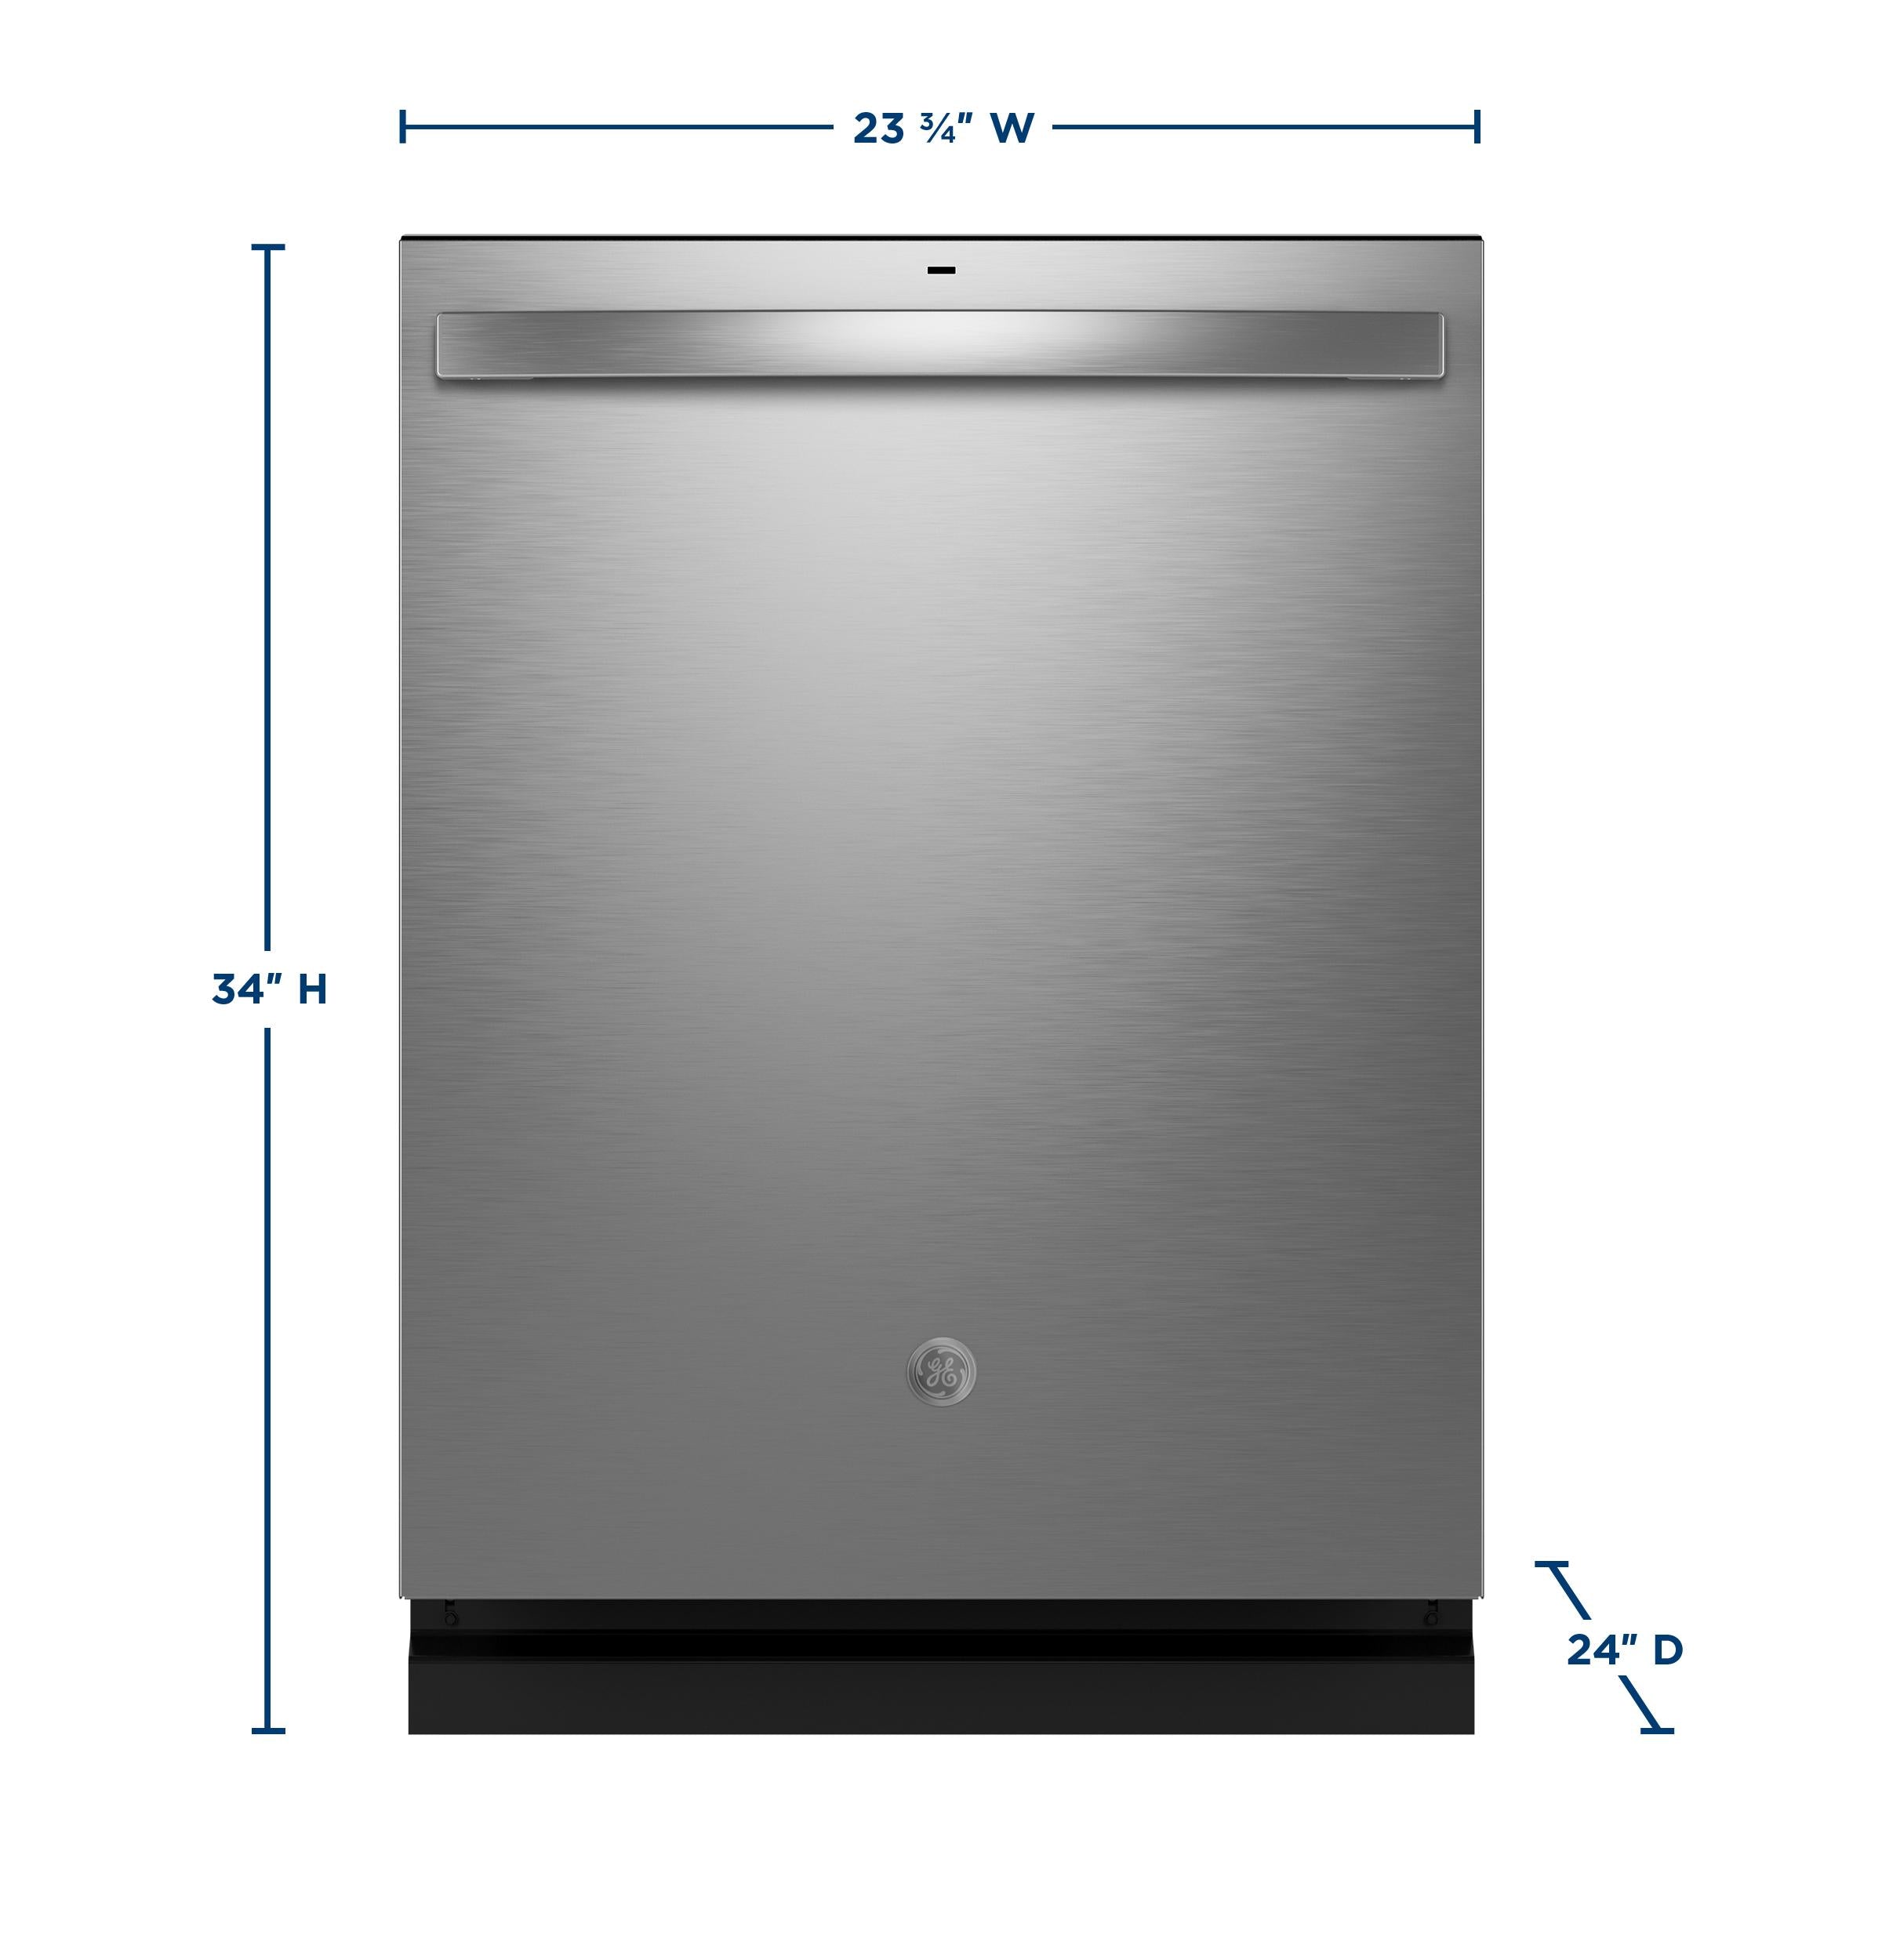 GE® ENERGY STAR® Fingerprint Resistant Top Control with Stainless Steel Interior Dishwasher with Sanitize Cycle